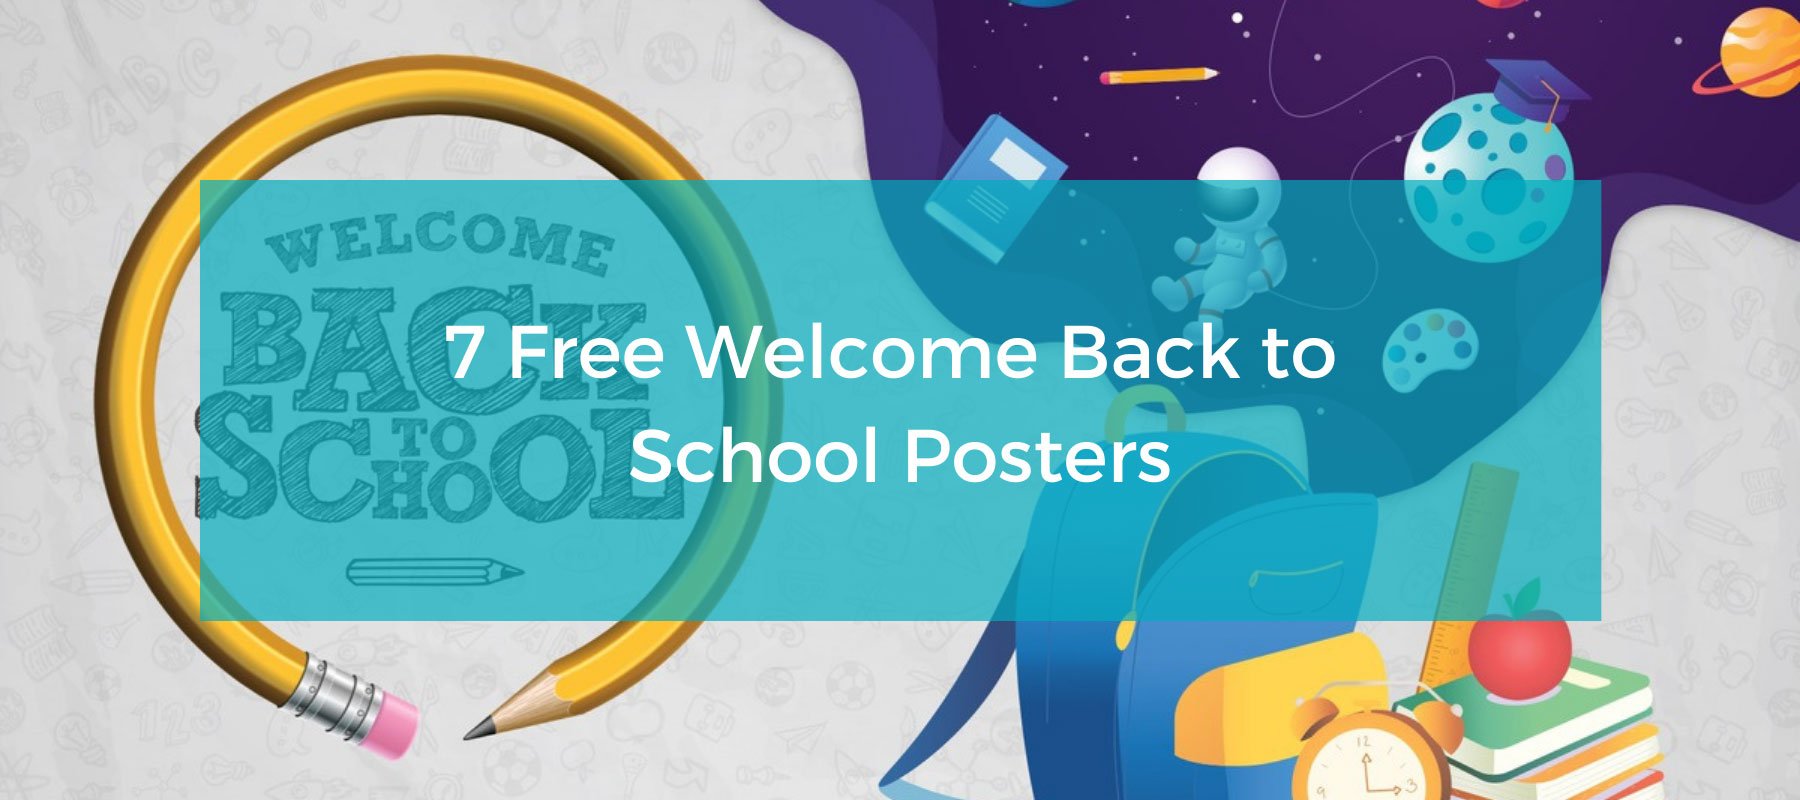 7 Free Welcome Back to School Posters